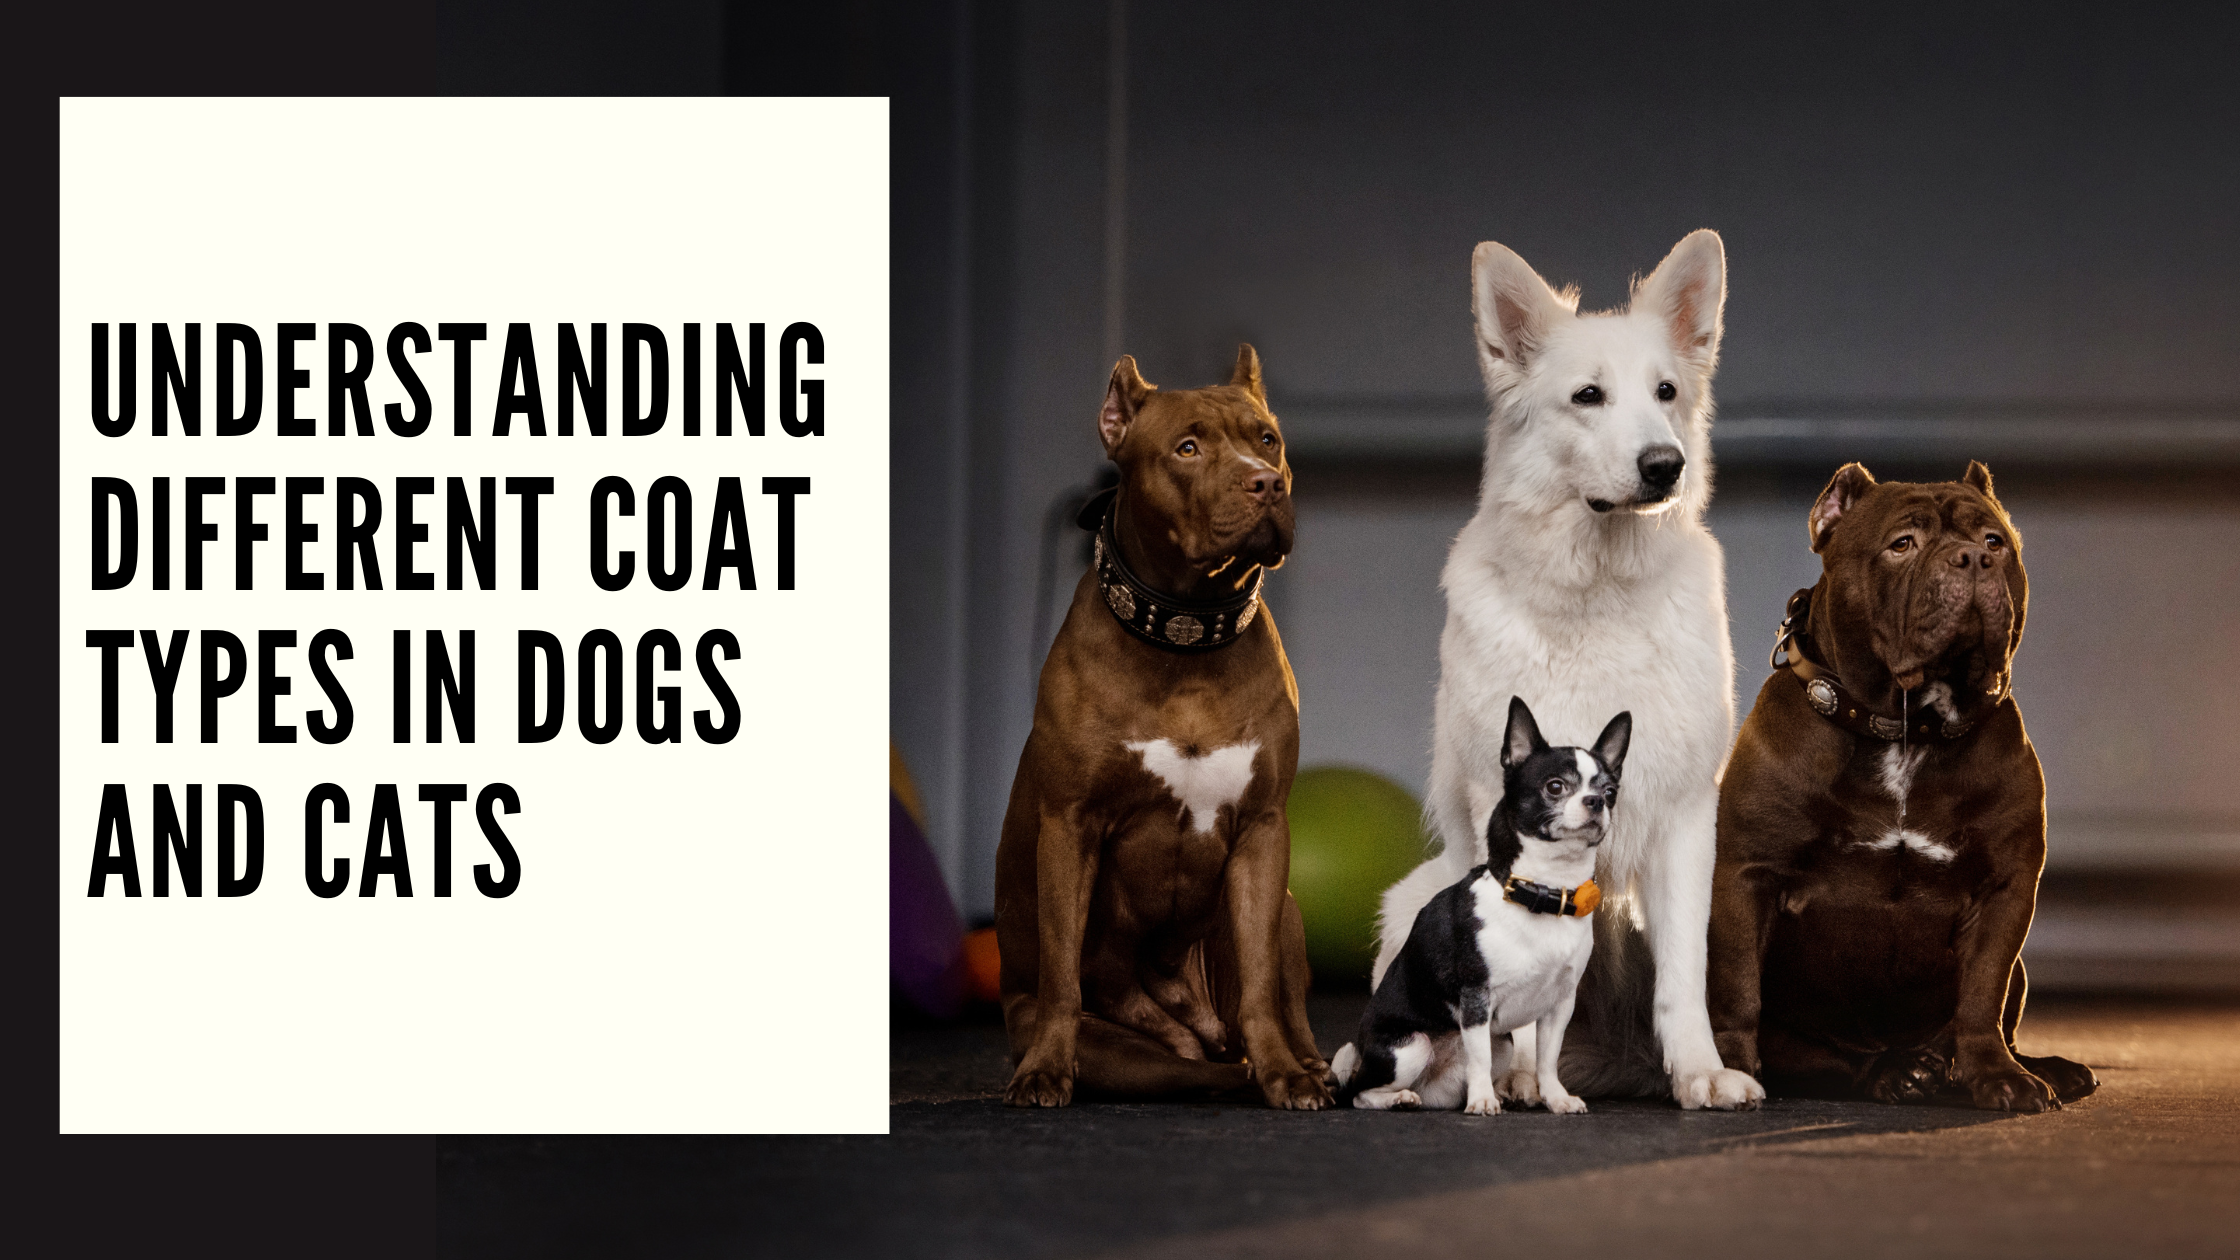 Understanding Different Coat Types in Dogs and Cats